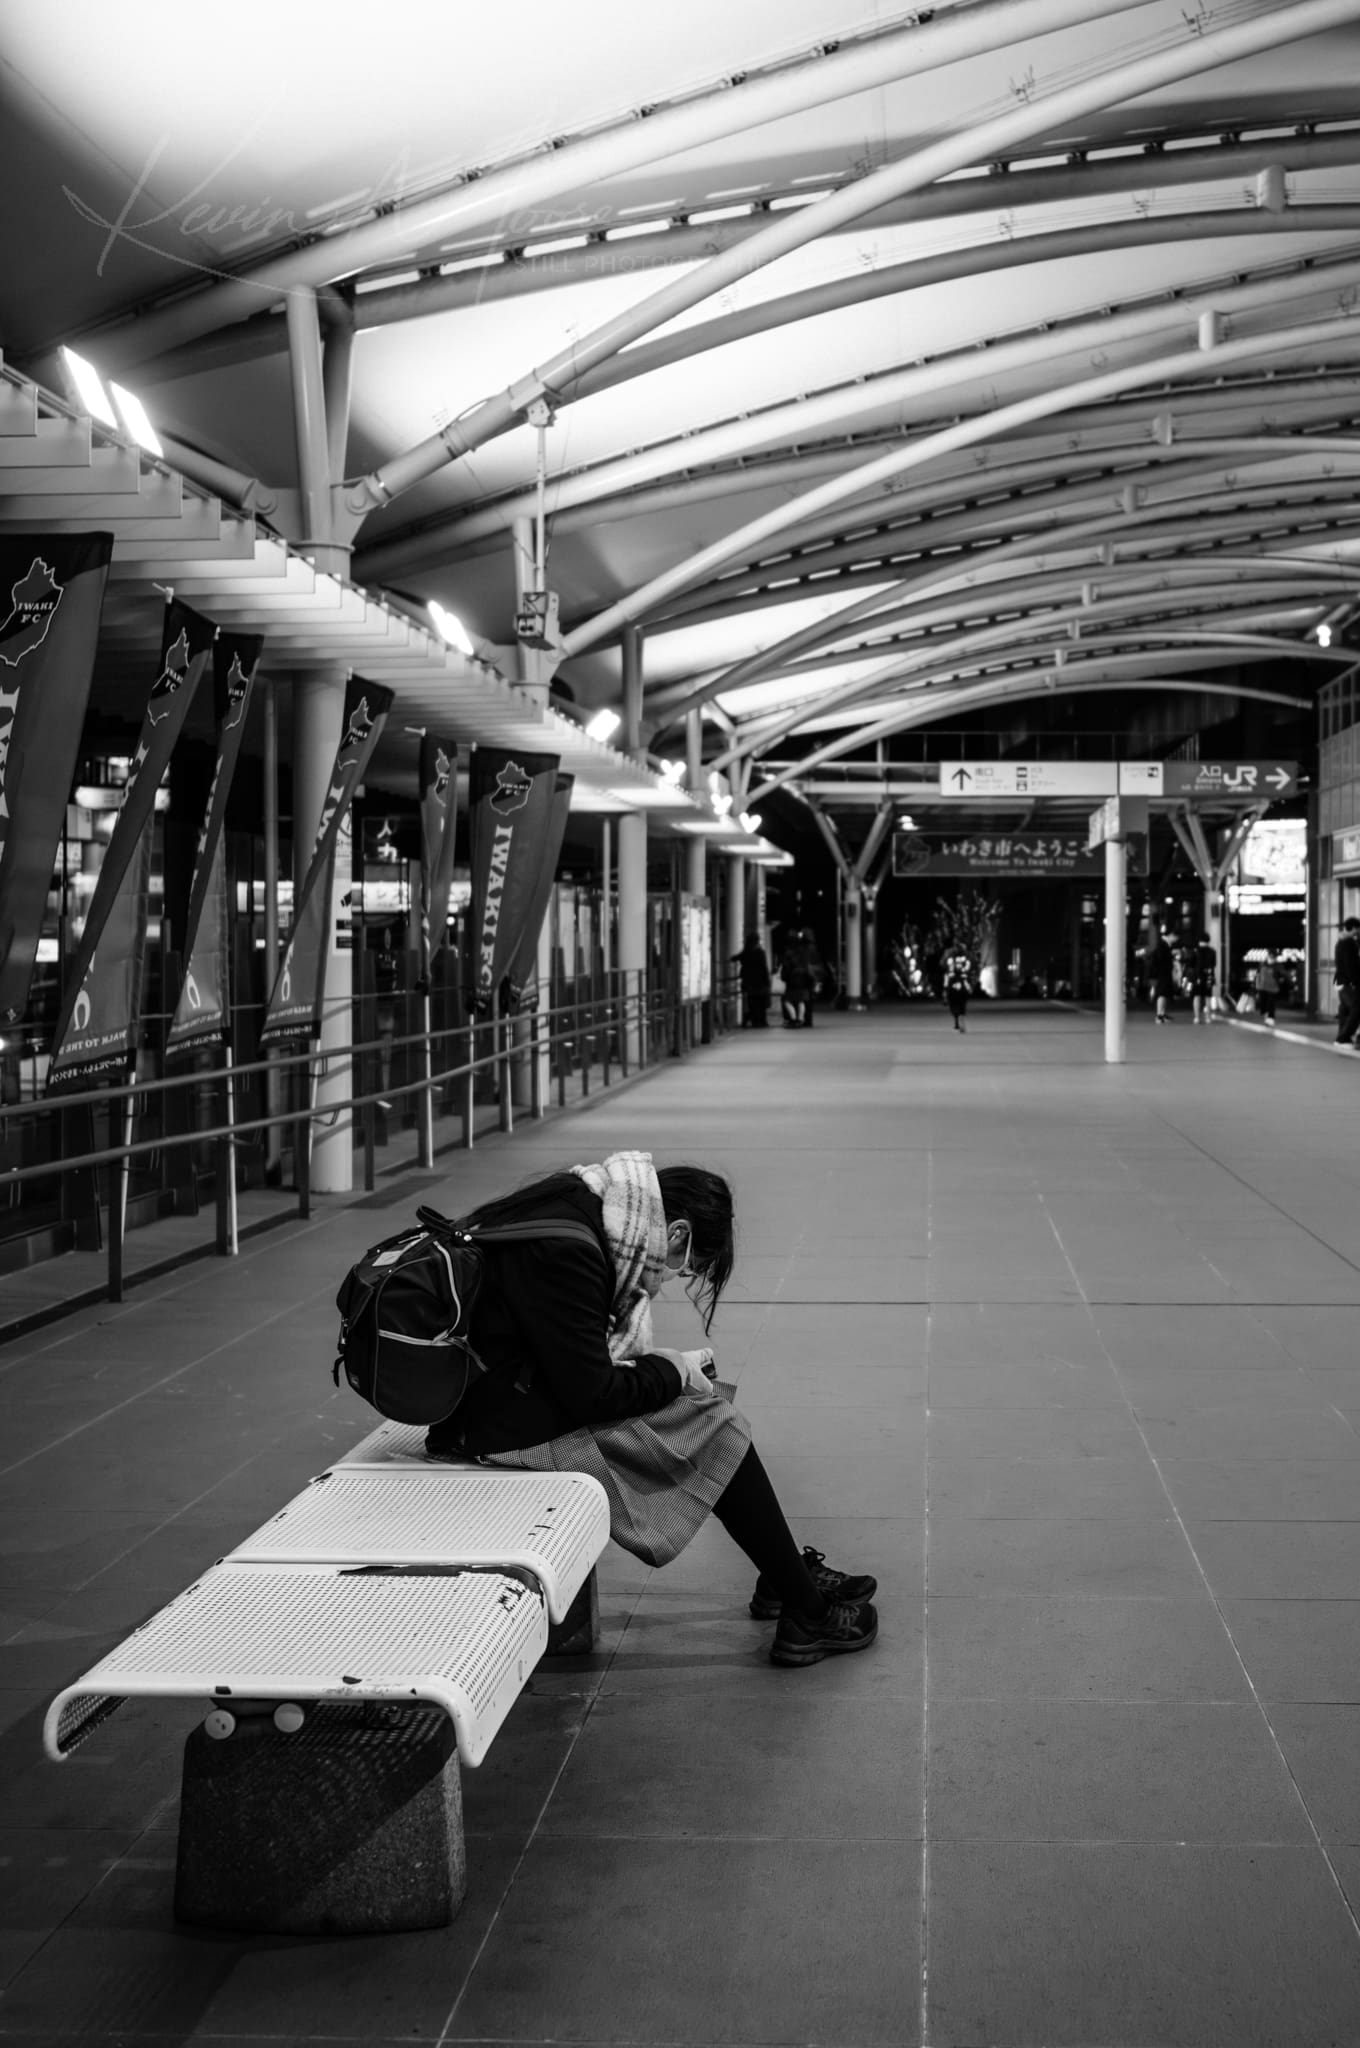 Lonely individual reading at a modern, architectural train station.